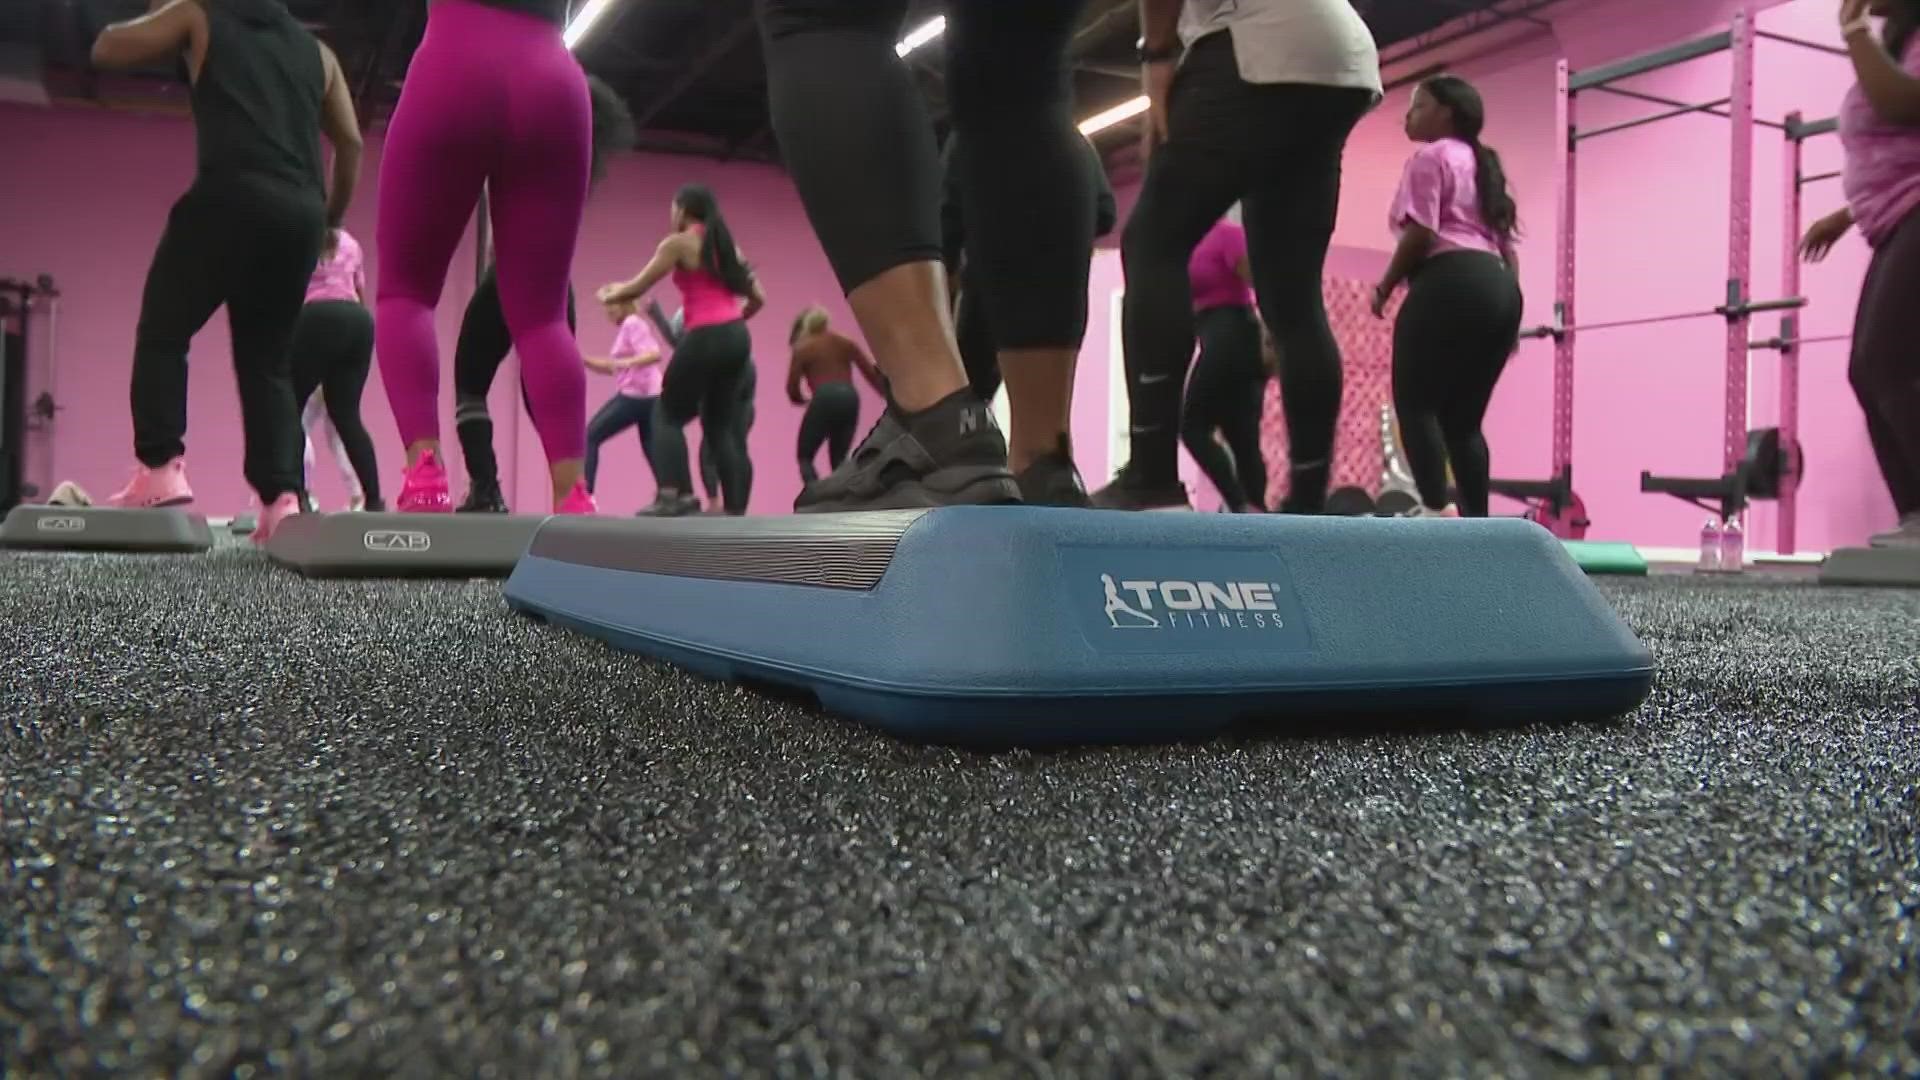 Vibe step, which was a huge fitness trend in the late 80s and early 90s, has gotten a serious reboot.